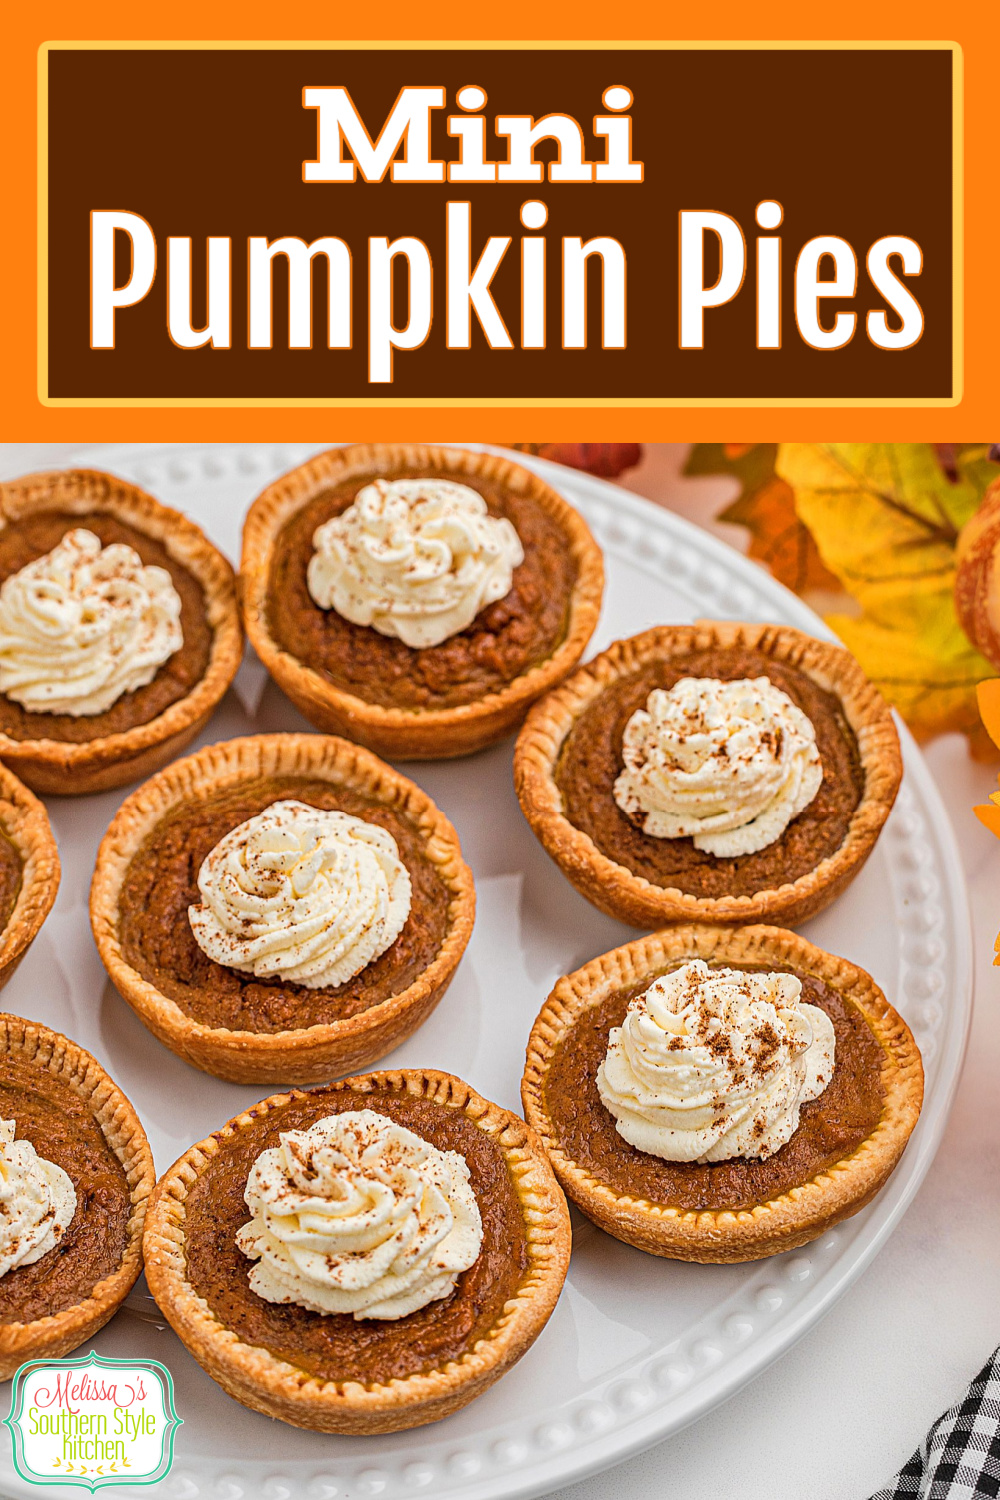 These Mini Pumpkin Pies are just the right size for those who like to sample all of the desserts on the holiday table #pumpkinpie #minipies #pumpkinpierecipes #muffinpanrecipes #thanksgivingdesserts #pie #southernpumpkinpie via @melissasssk